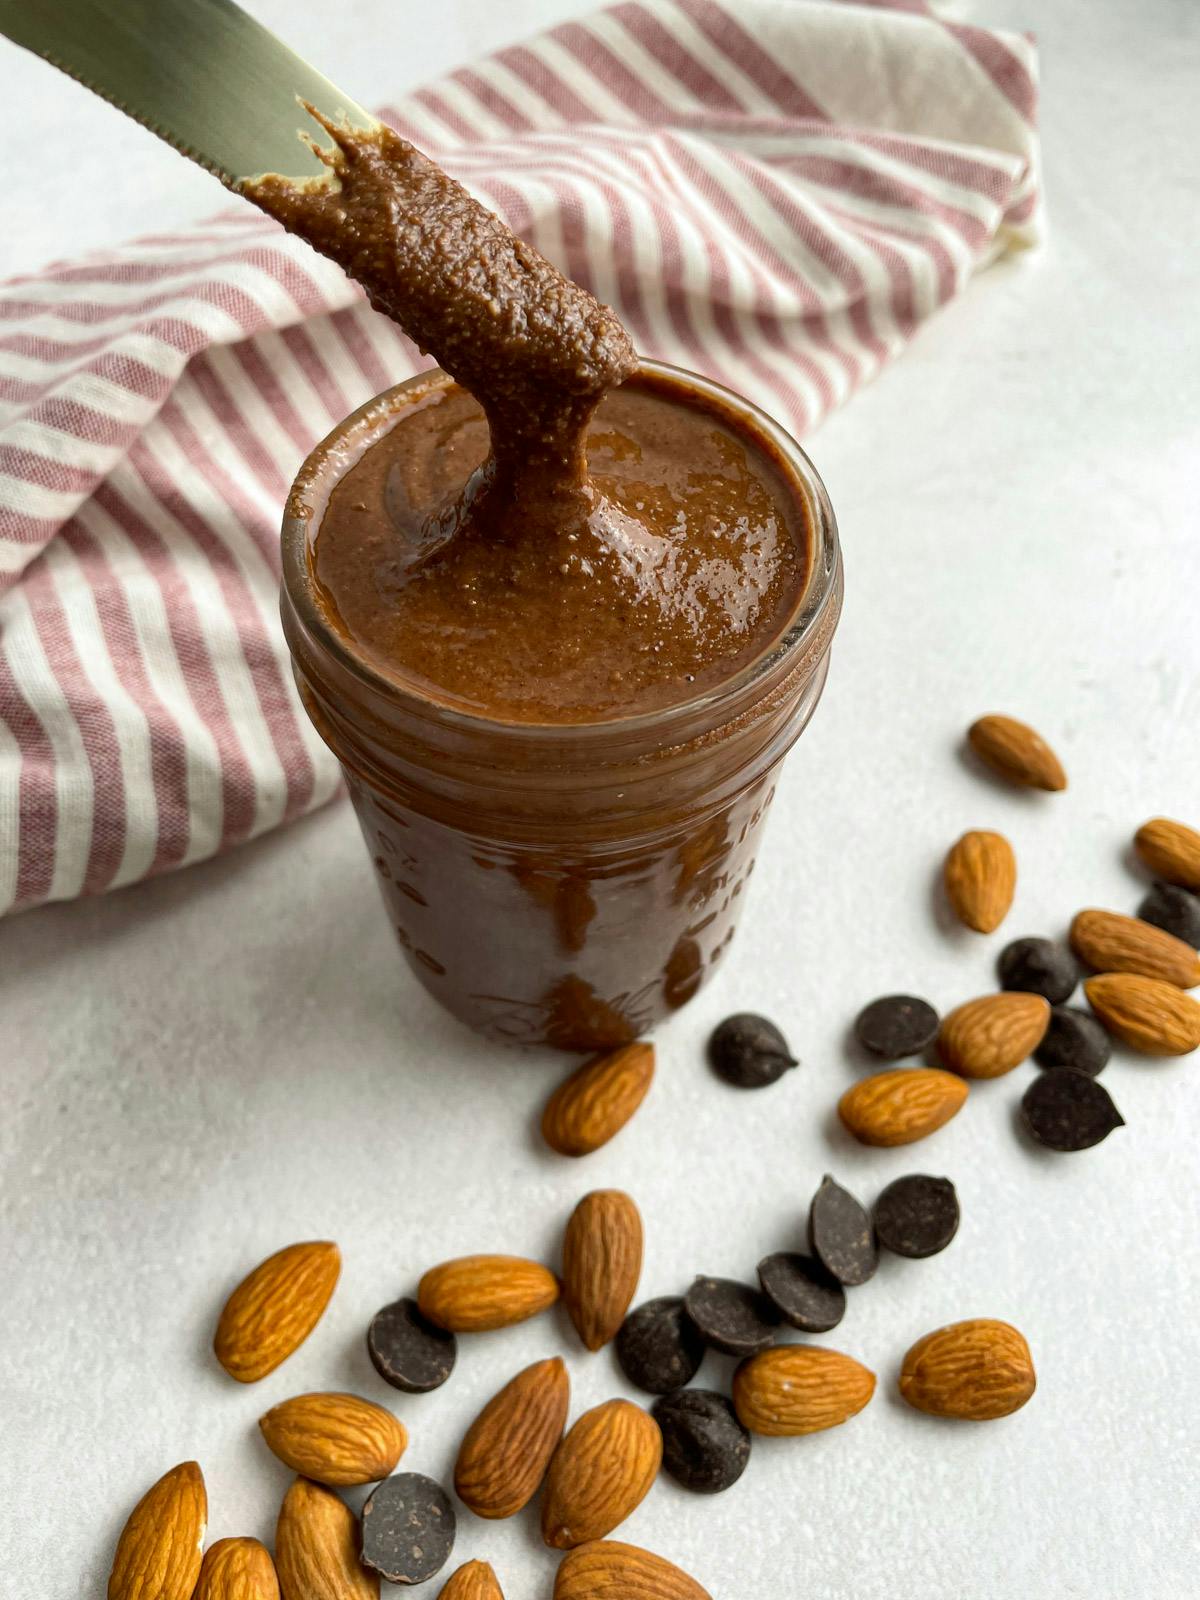 Chocolate almond butter in a jar with a knife scraping some out.